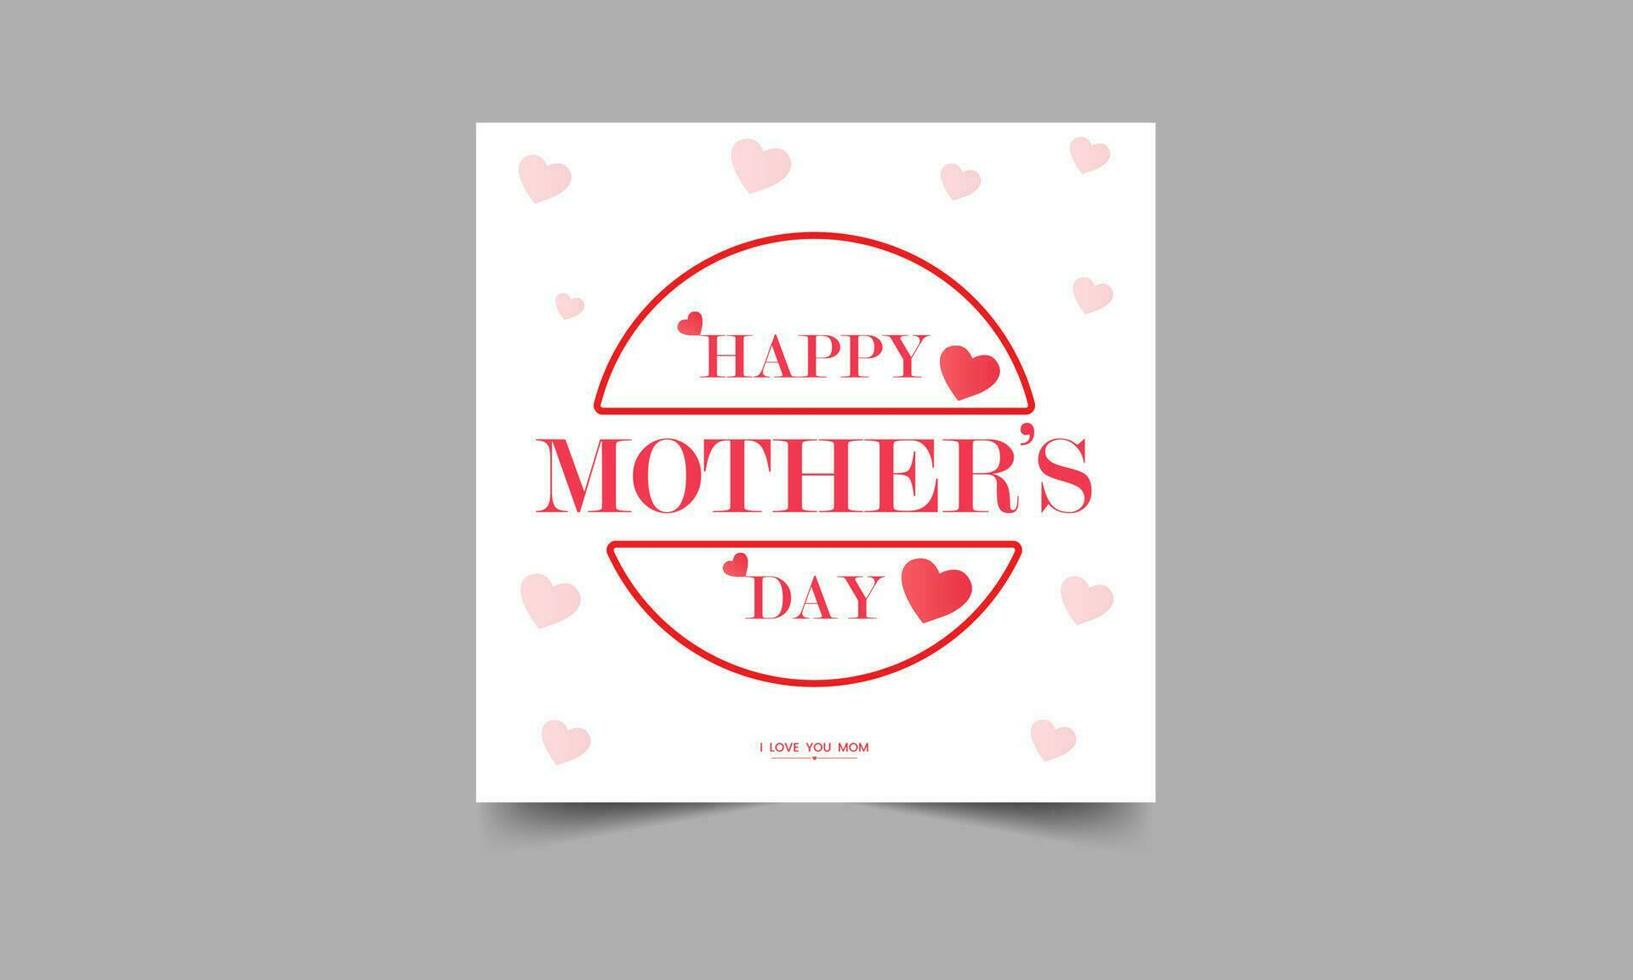 Mothers day for woman and child love you mum message vector